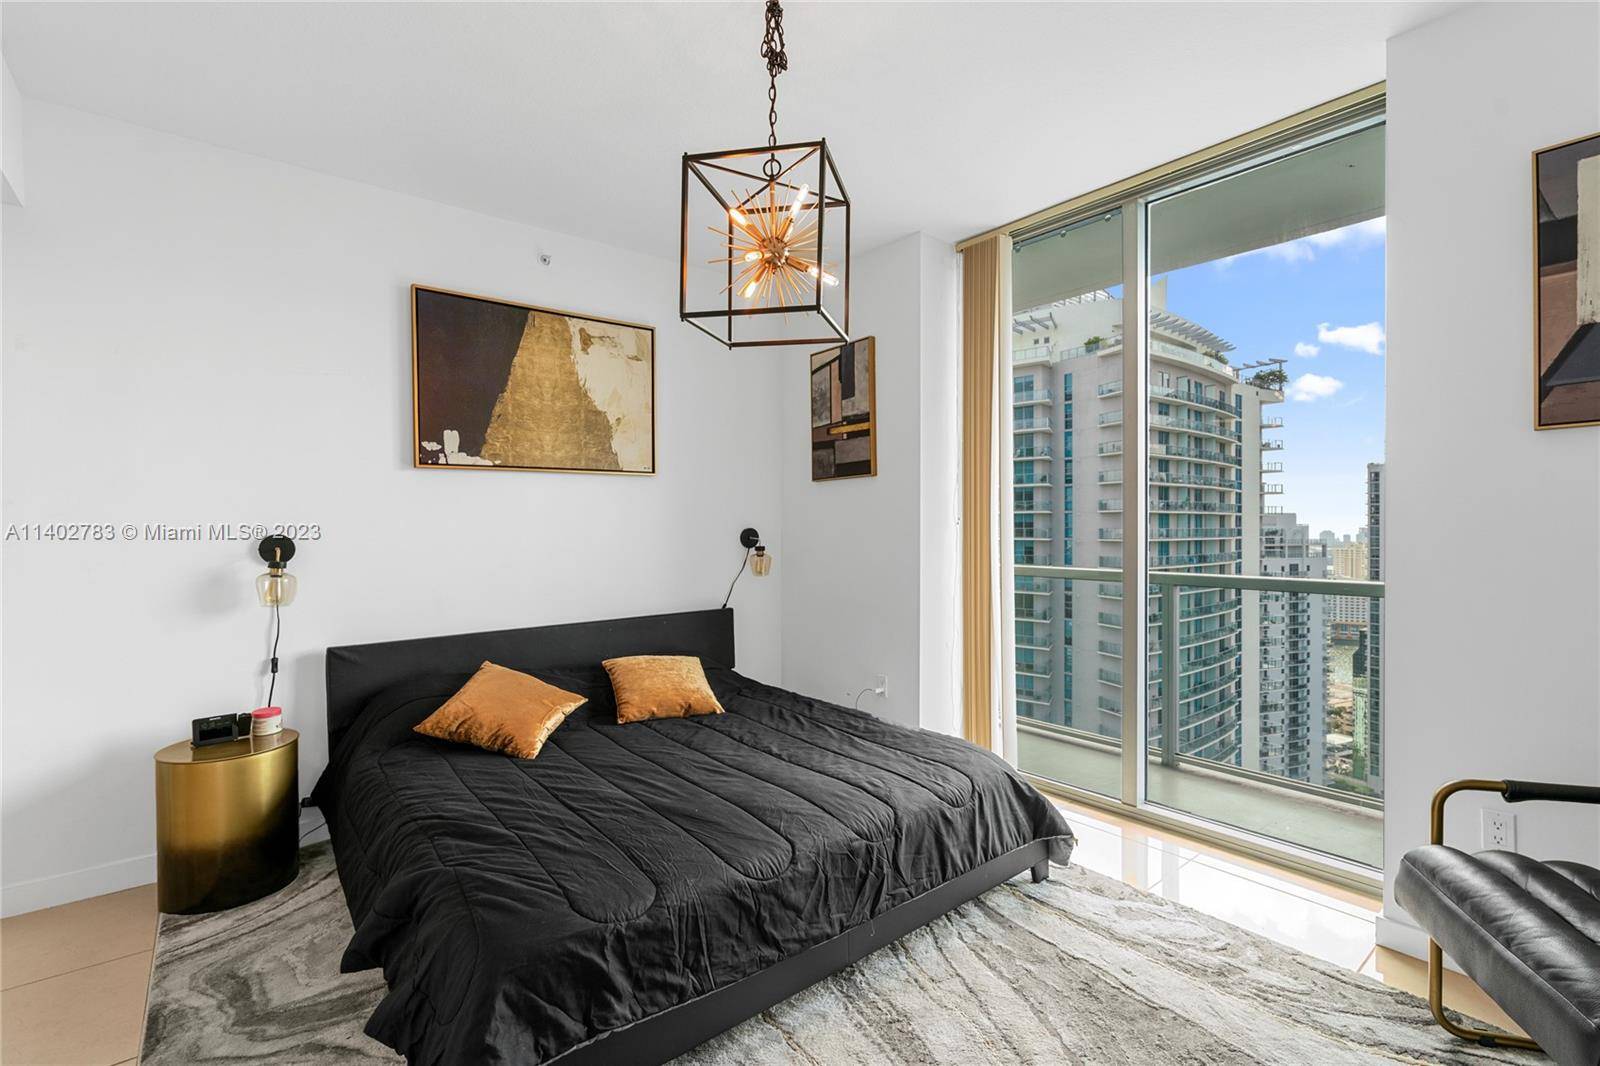 Experience this stylish, fully furnished 2 bed 2 bath modern penthouse corner unit with breathtaking views of the city from its wraparound balcony and partial bay views.